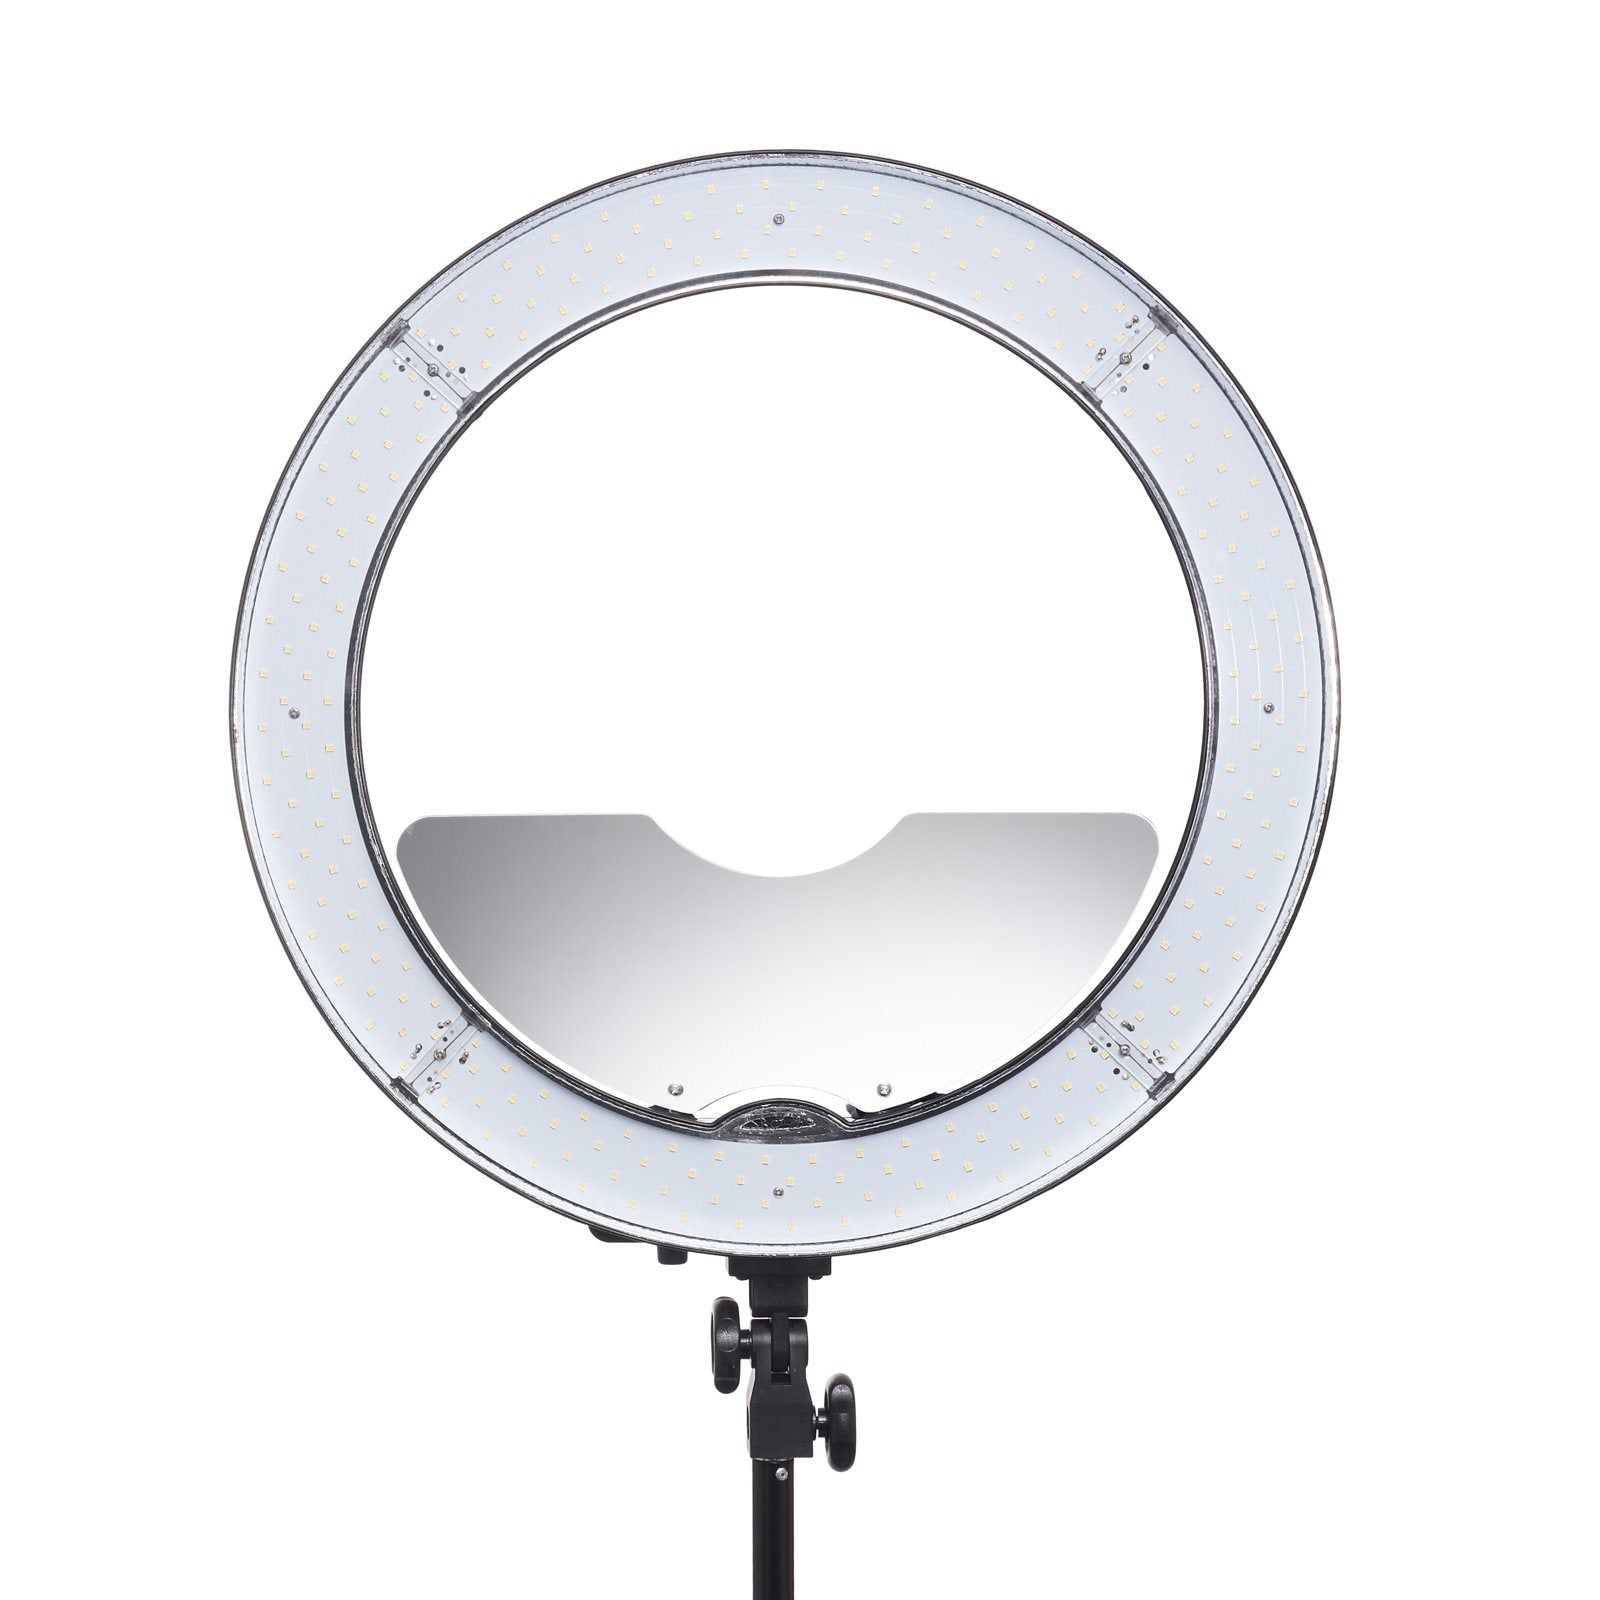 Classic 19" Ring Light | Luvo Store